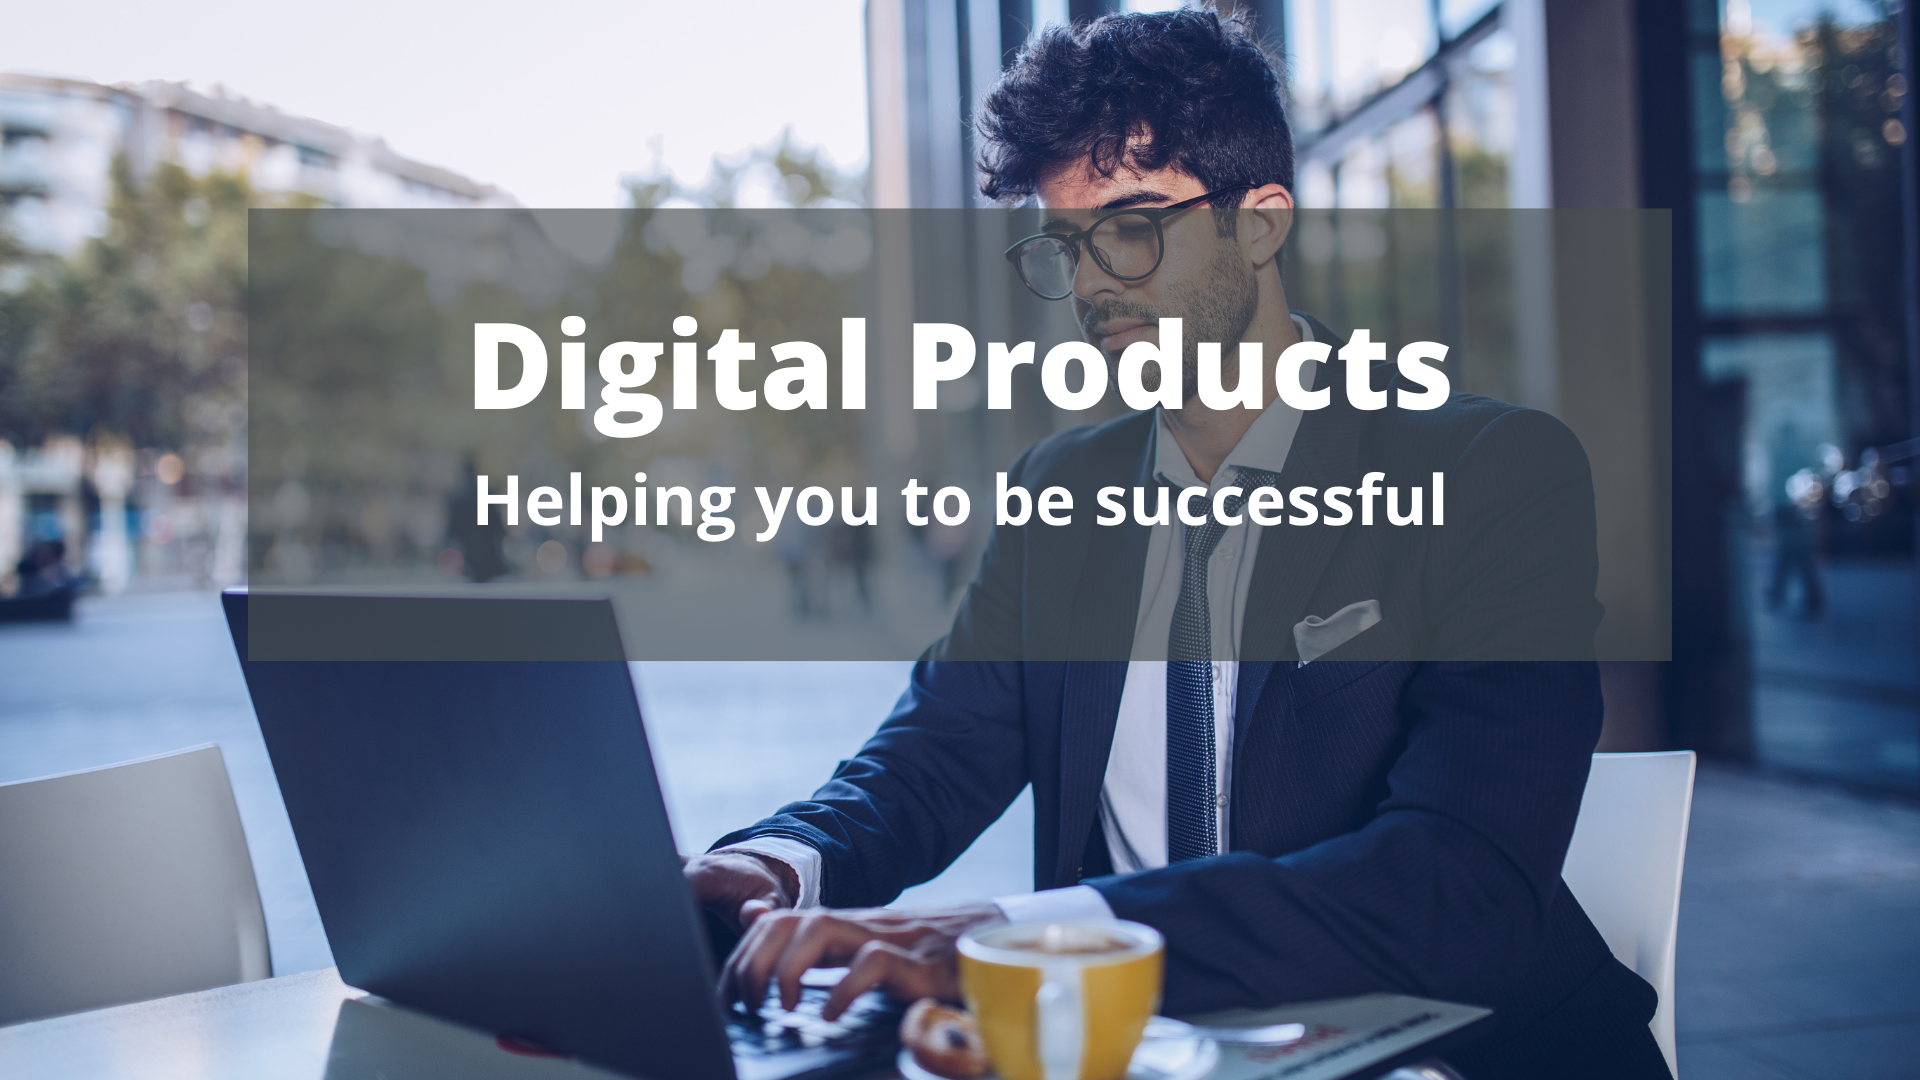 Amazing Digital Products for your success